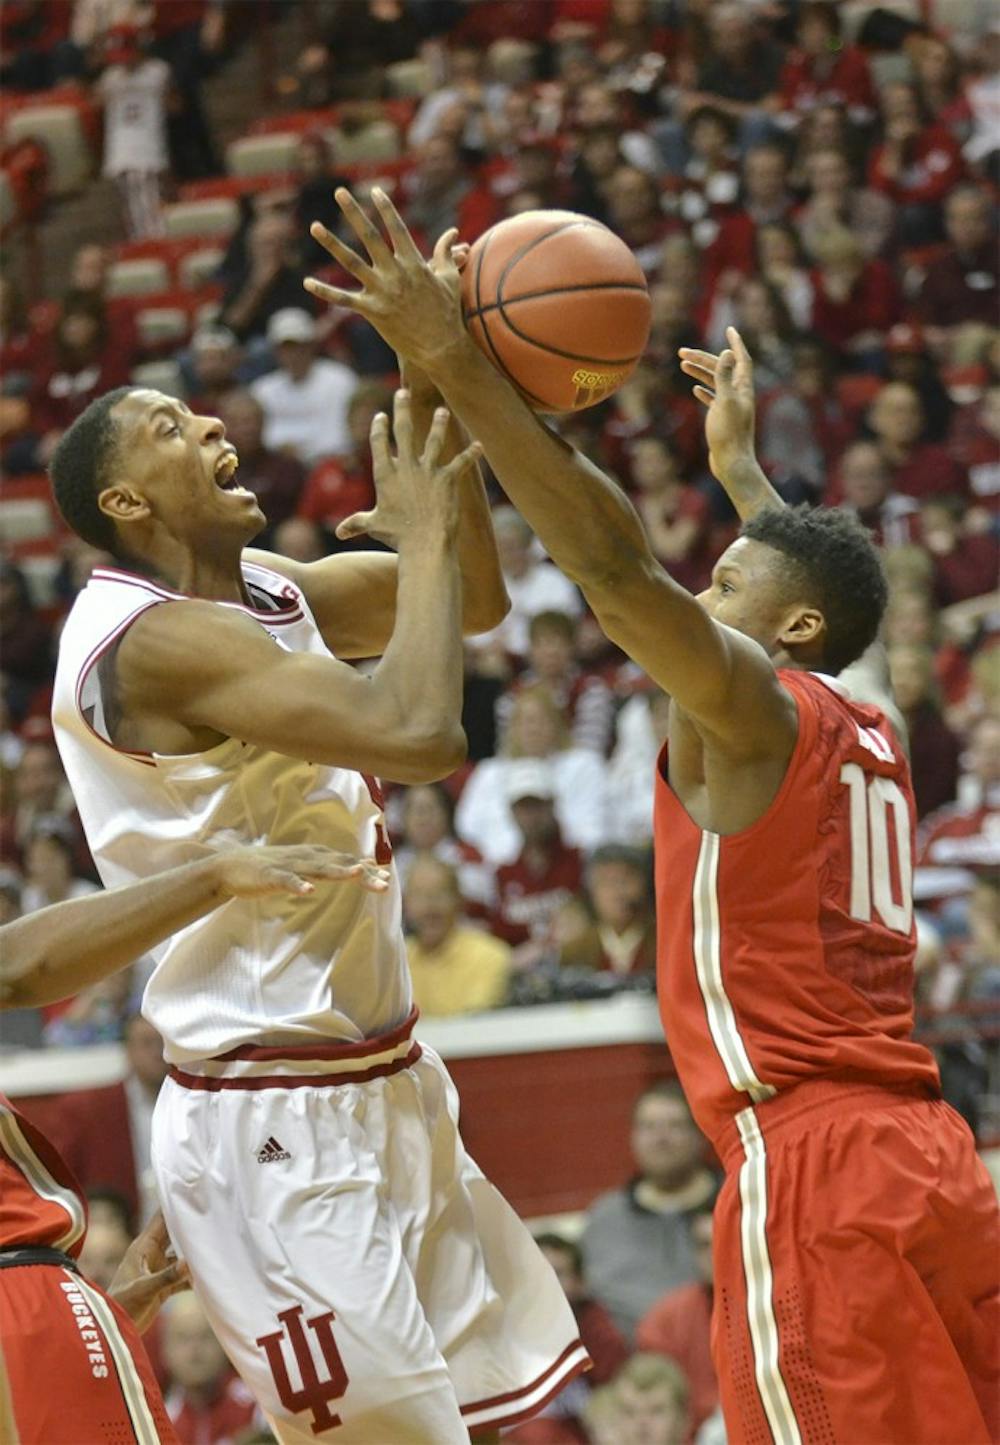 Junior guard Troy Williams yells after an Ohio State defender blocks his shot on Sunday at Assembly Hall. The Hoosiers won 85-60.